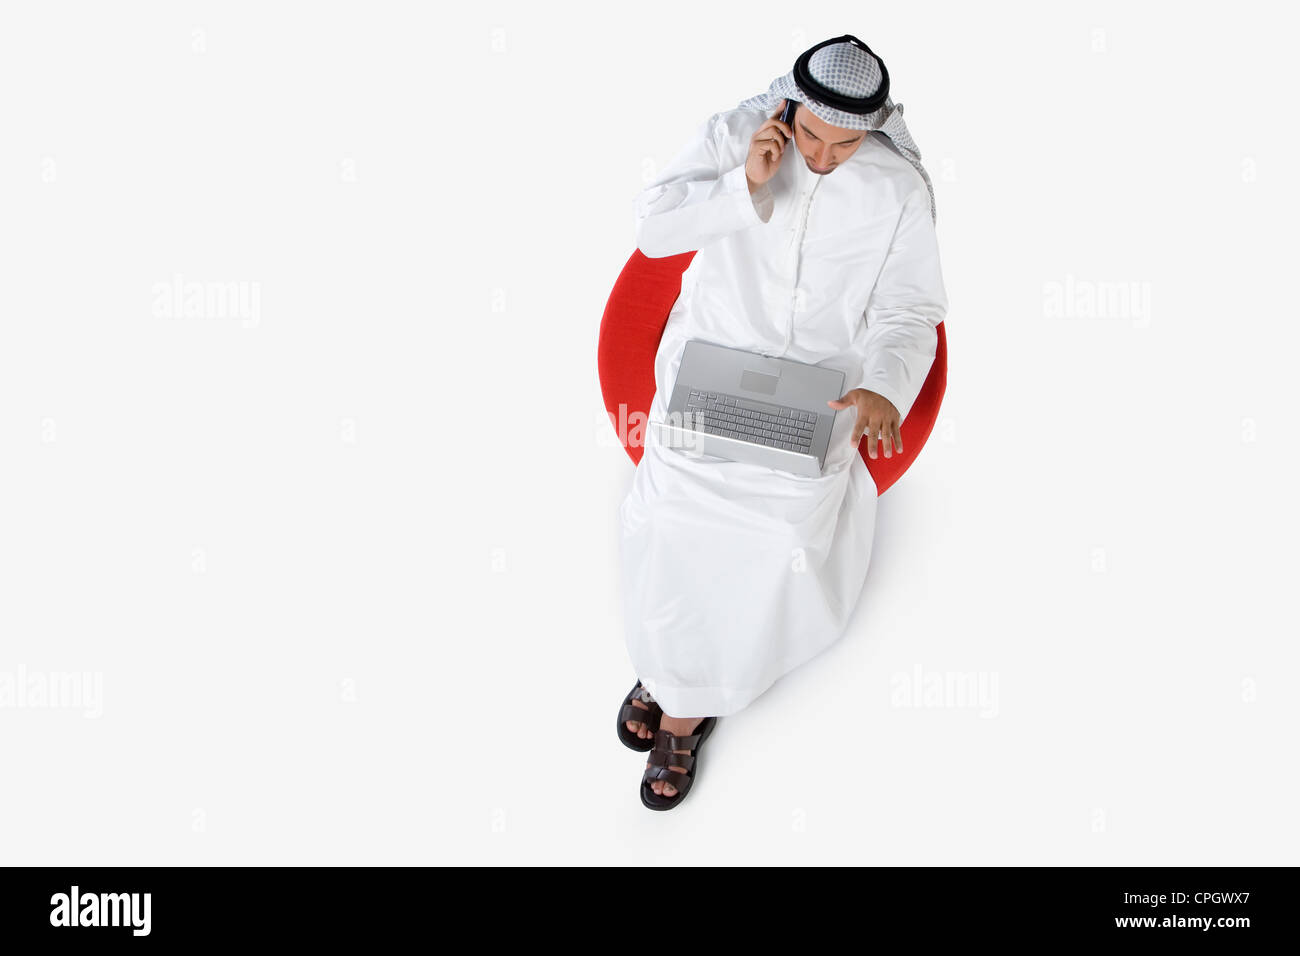 Young man on the phone, using laptop, elevated view Stock Photo